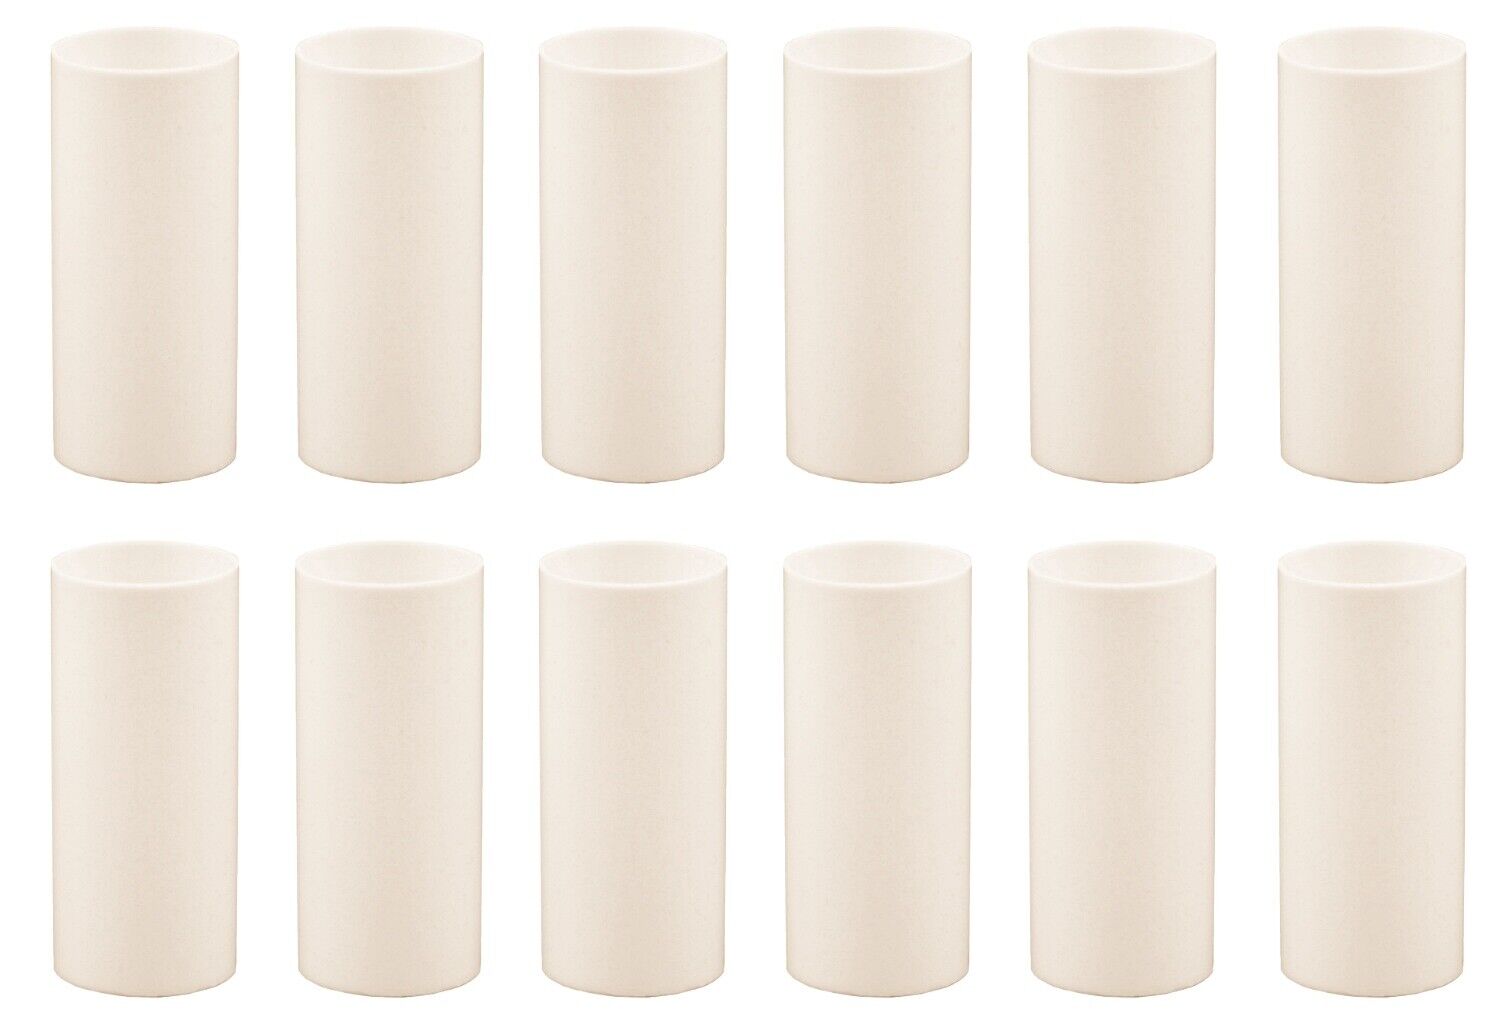 2 Inch Cream Plastic Candle Cover For Candelabra Base Lamp Sockets, 12 Pieces